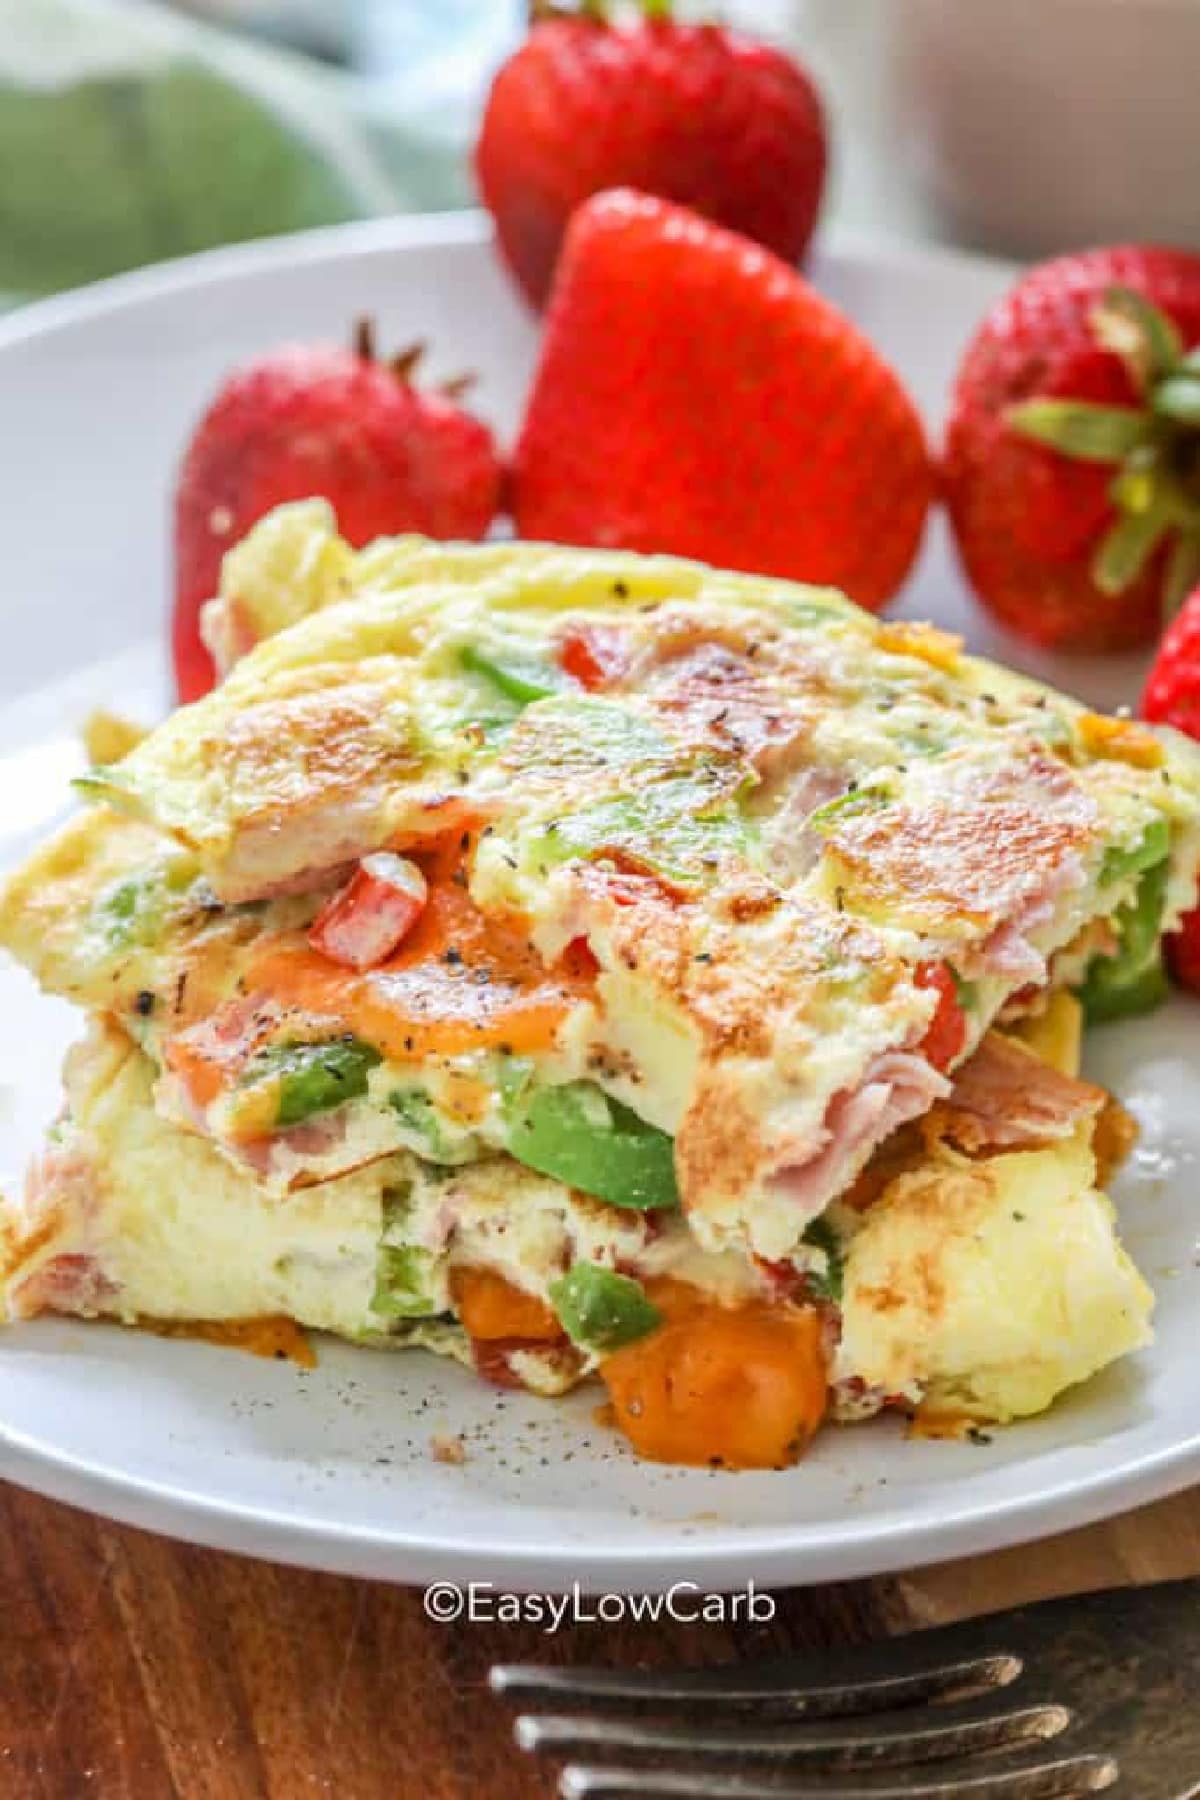 Denver Omlette on a white plate with strawberries in the background